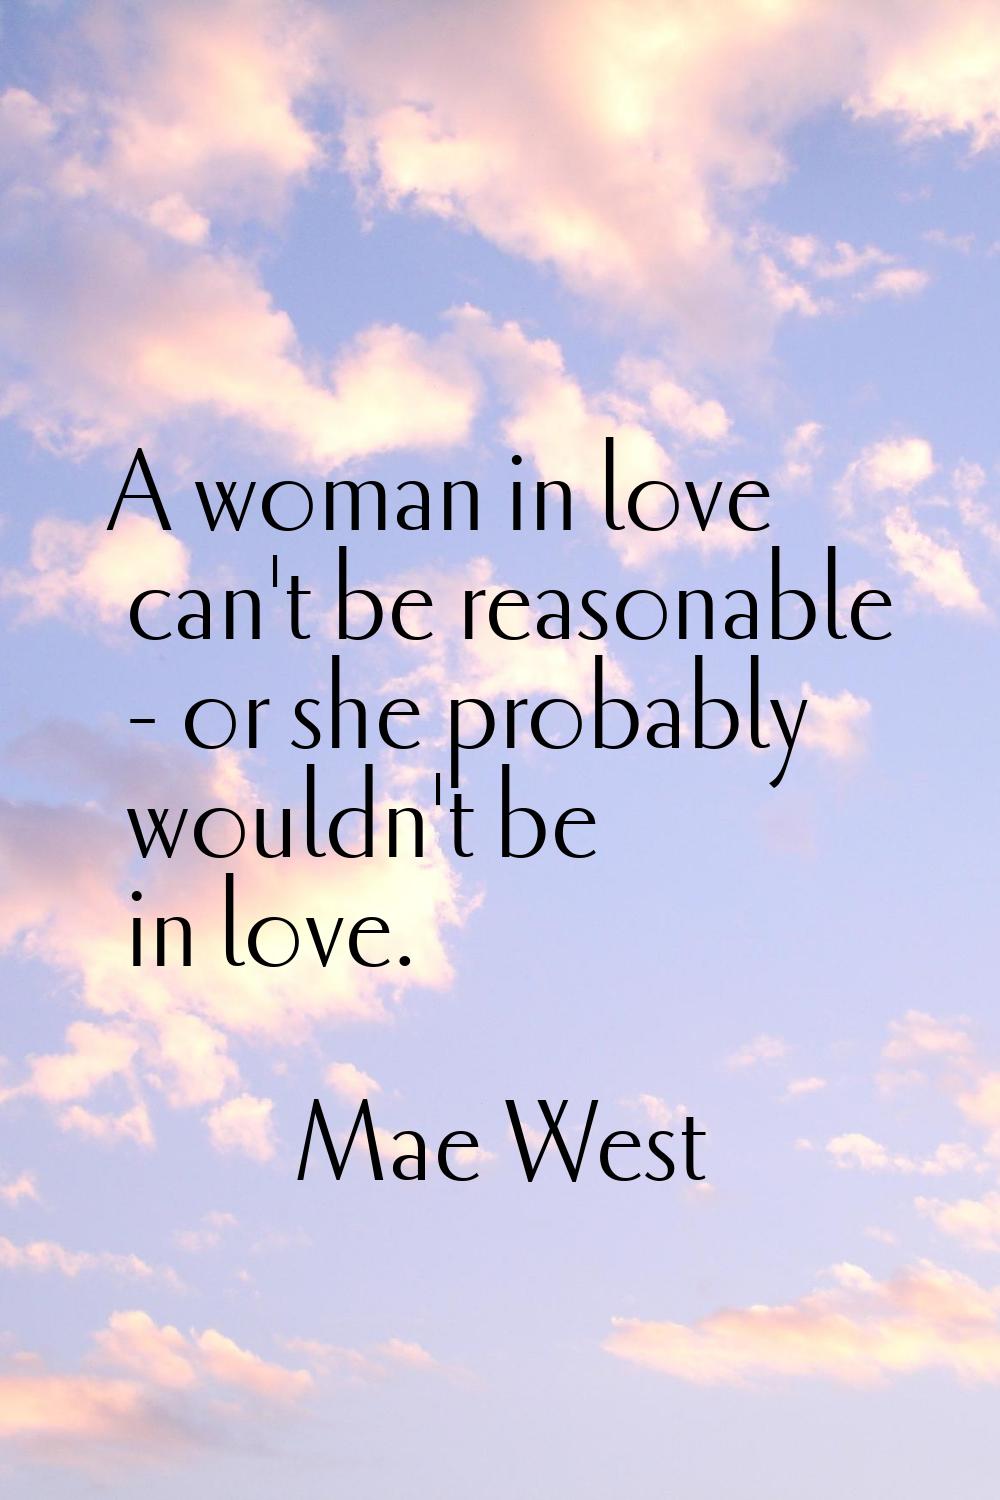 A woman in love can't be reasonable - or she probably wouldn't be in love.